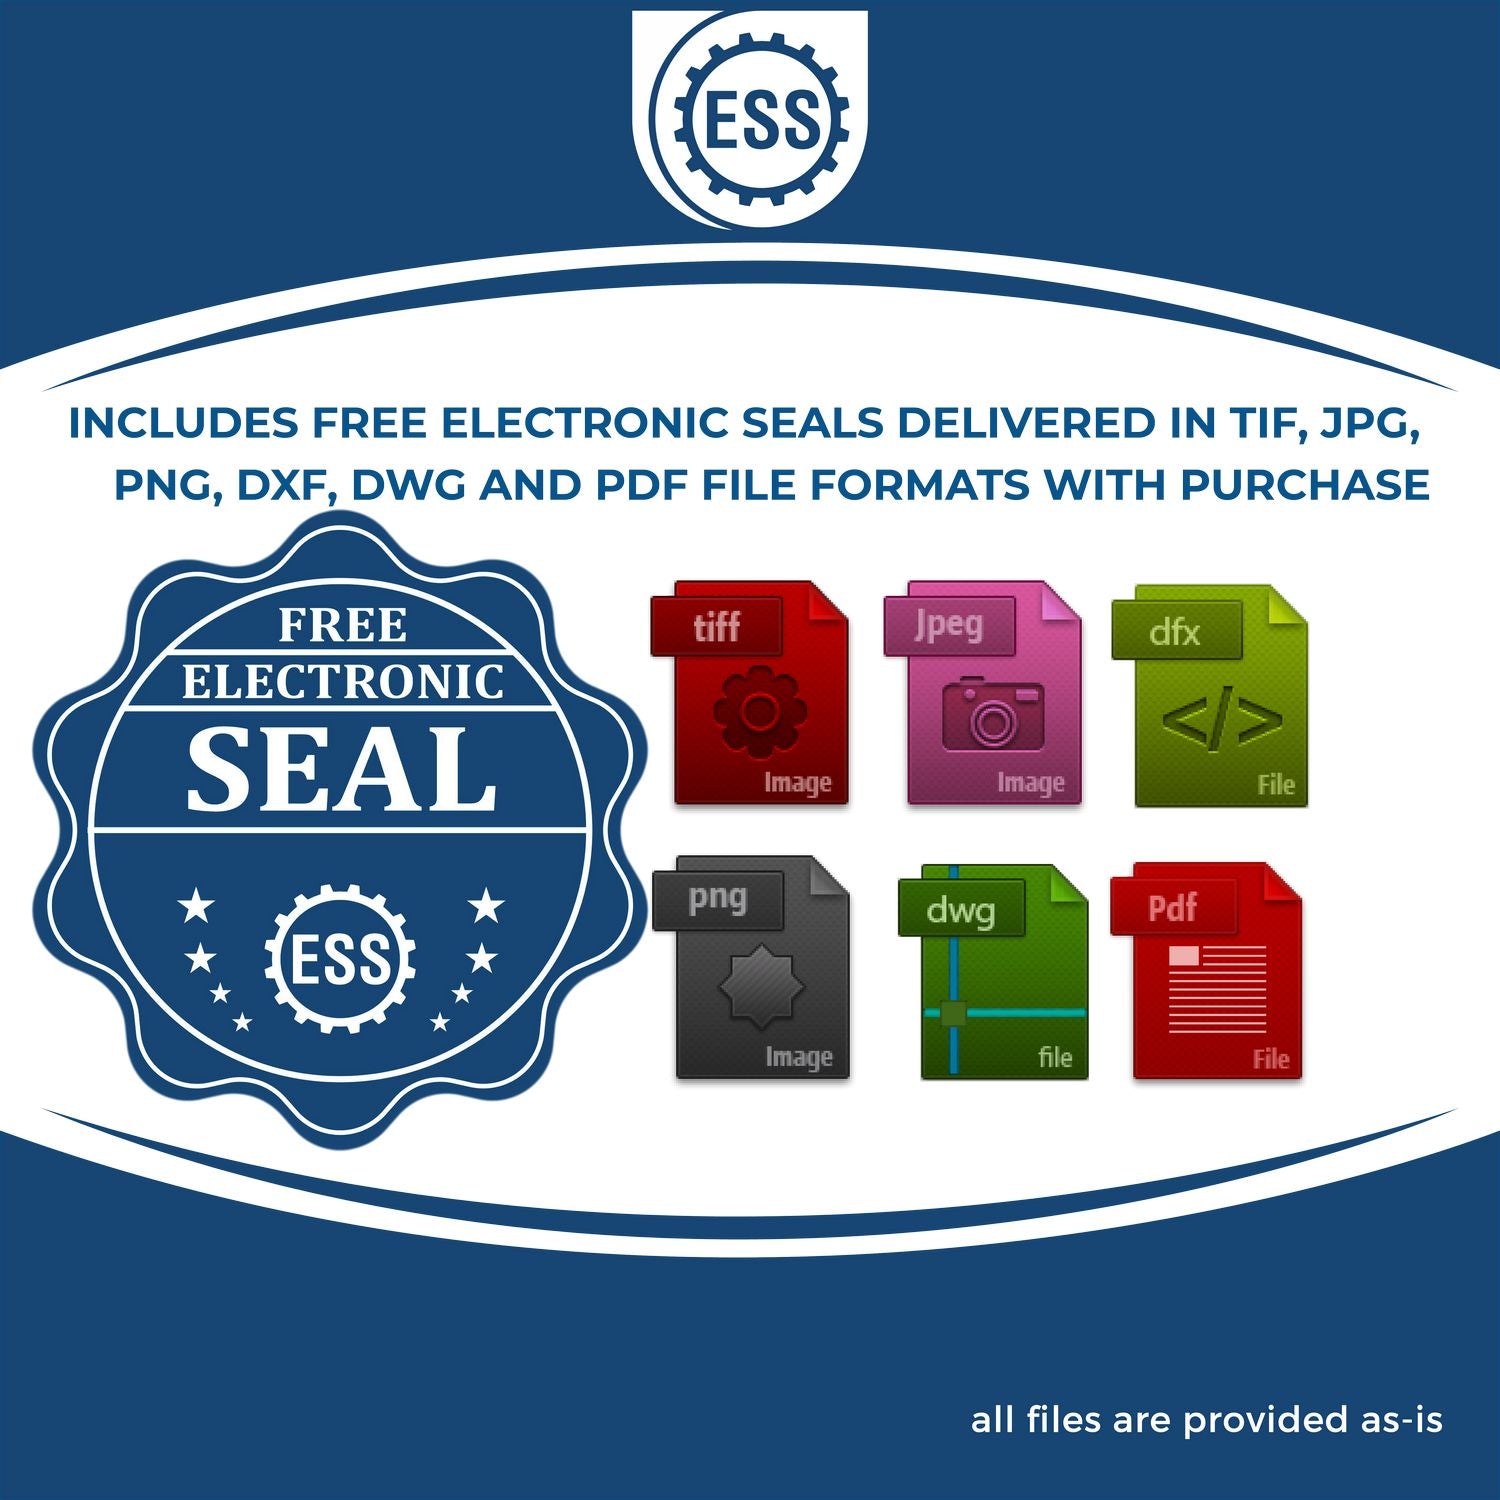 An infographic for the free electronic seal for the Long Reach New York Land Surveyor Seal illustrating the different file type icons such as DXF, DWG, TIF, JPG and PNG.